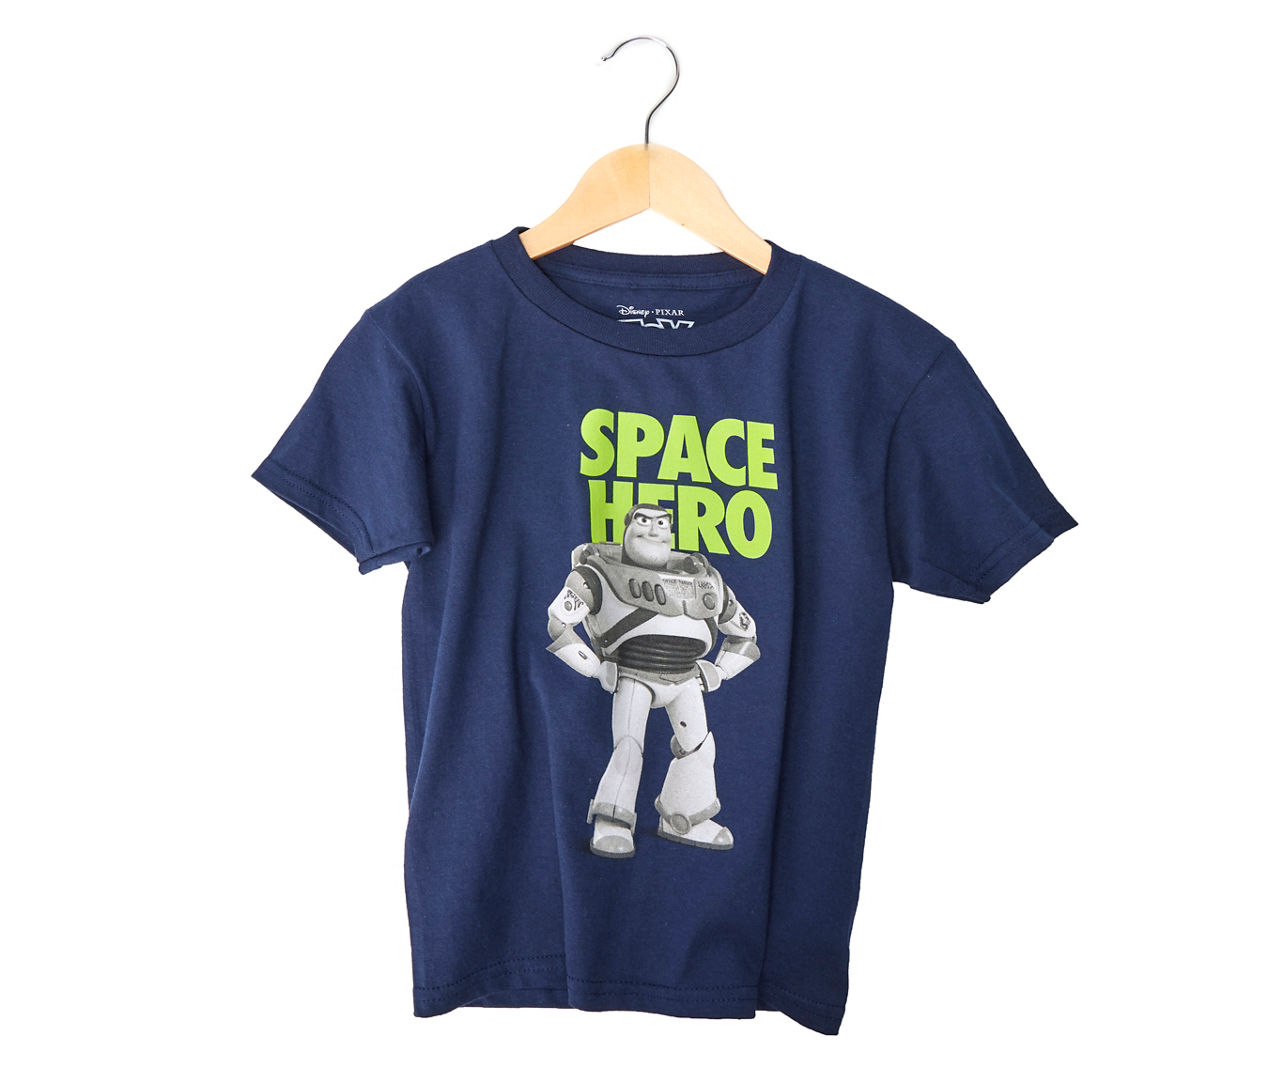 Kids' Size 8 Toy Story "Space Hero" Navy Buzz Graphic Tee